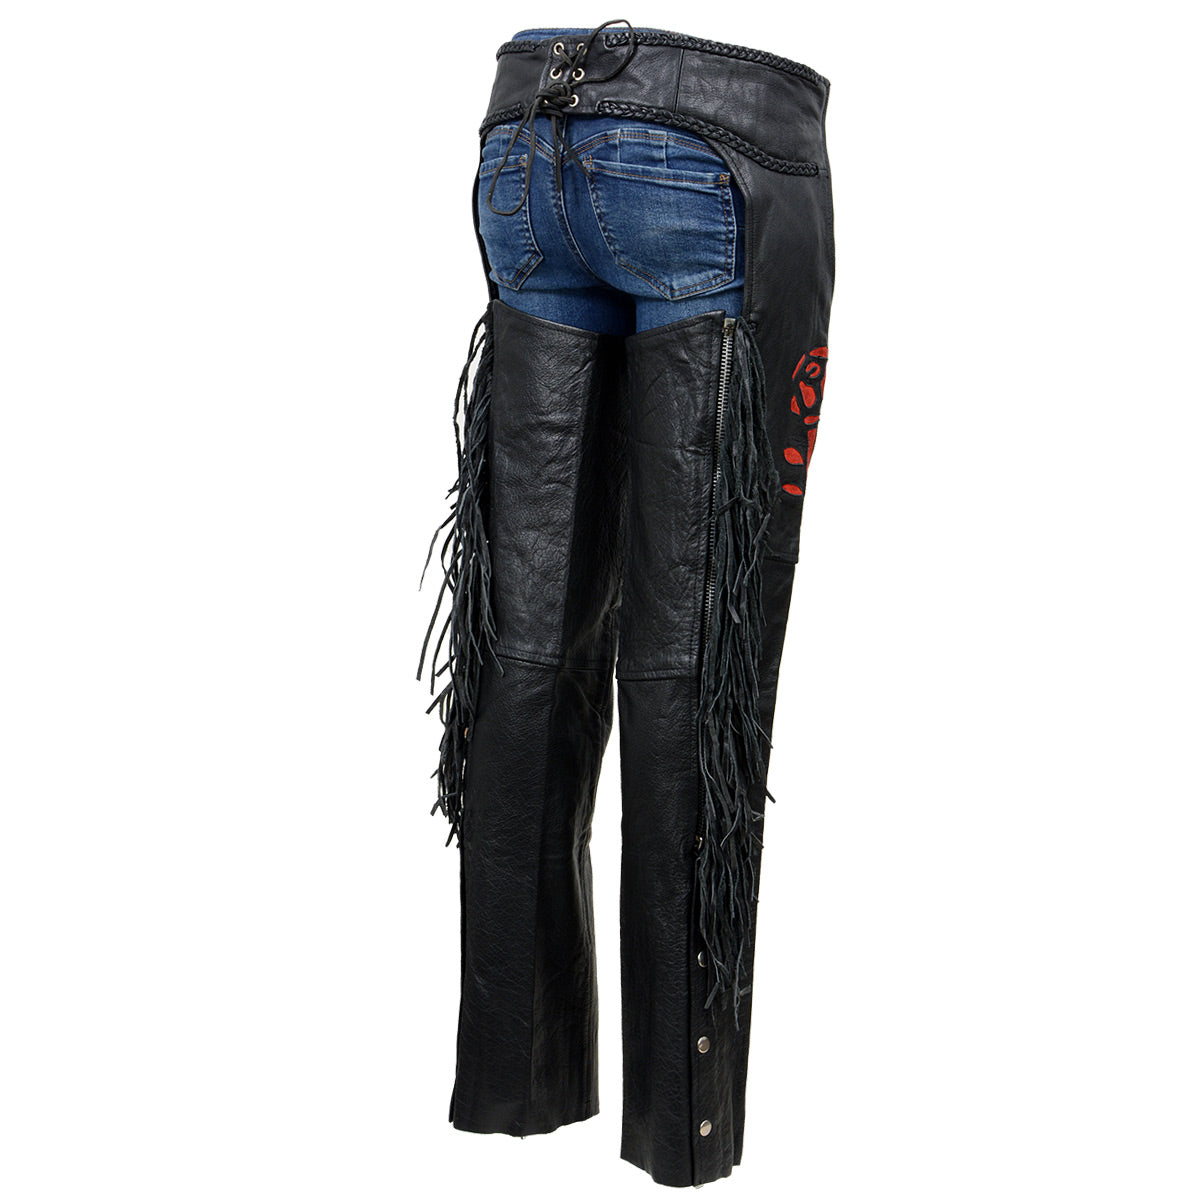 Milwaukee Leather SH1116 Women's Classic Braided & Fringed Black Leather Motorcycle Chaps w/ Red Rose Embroidery